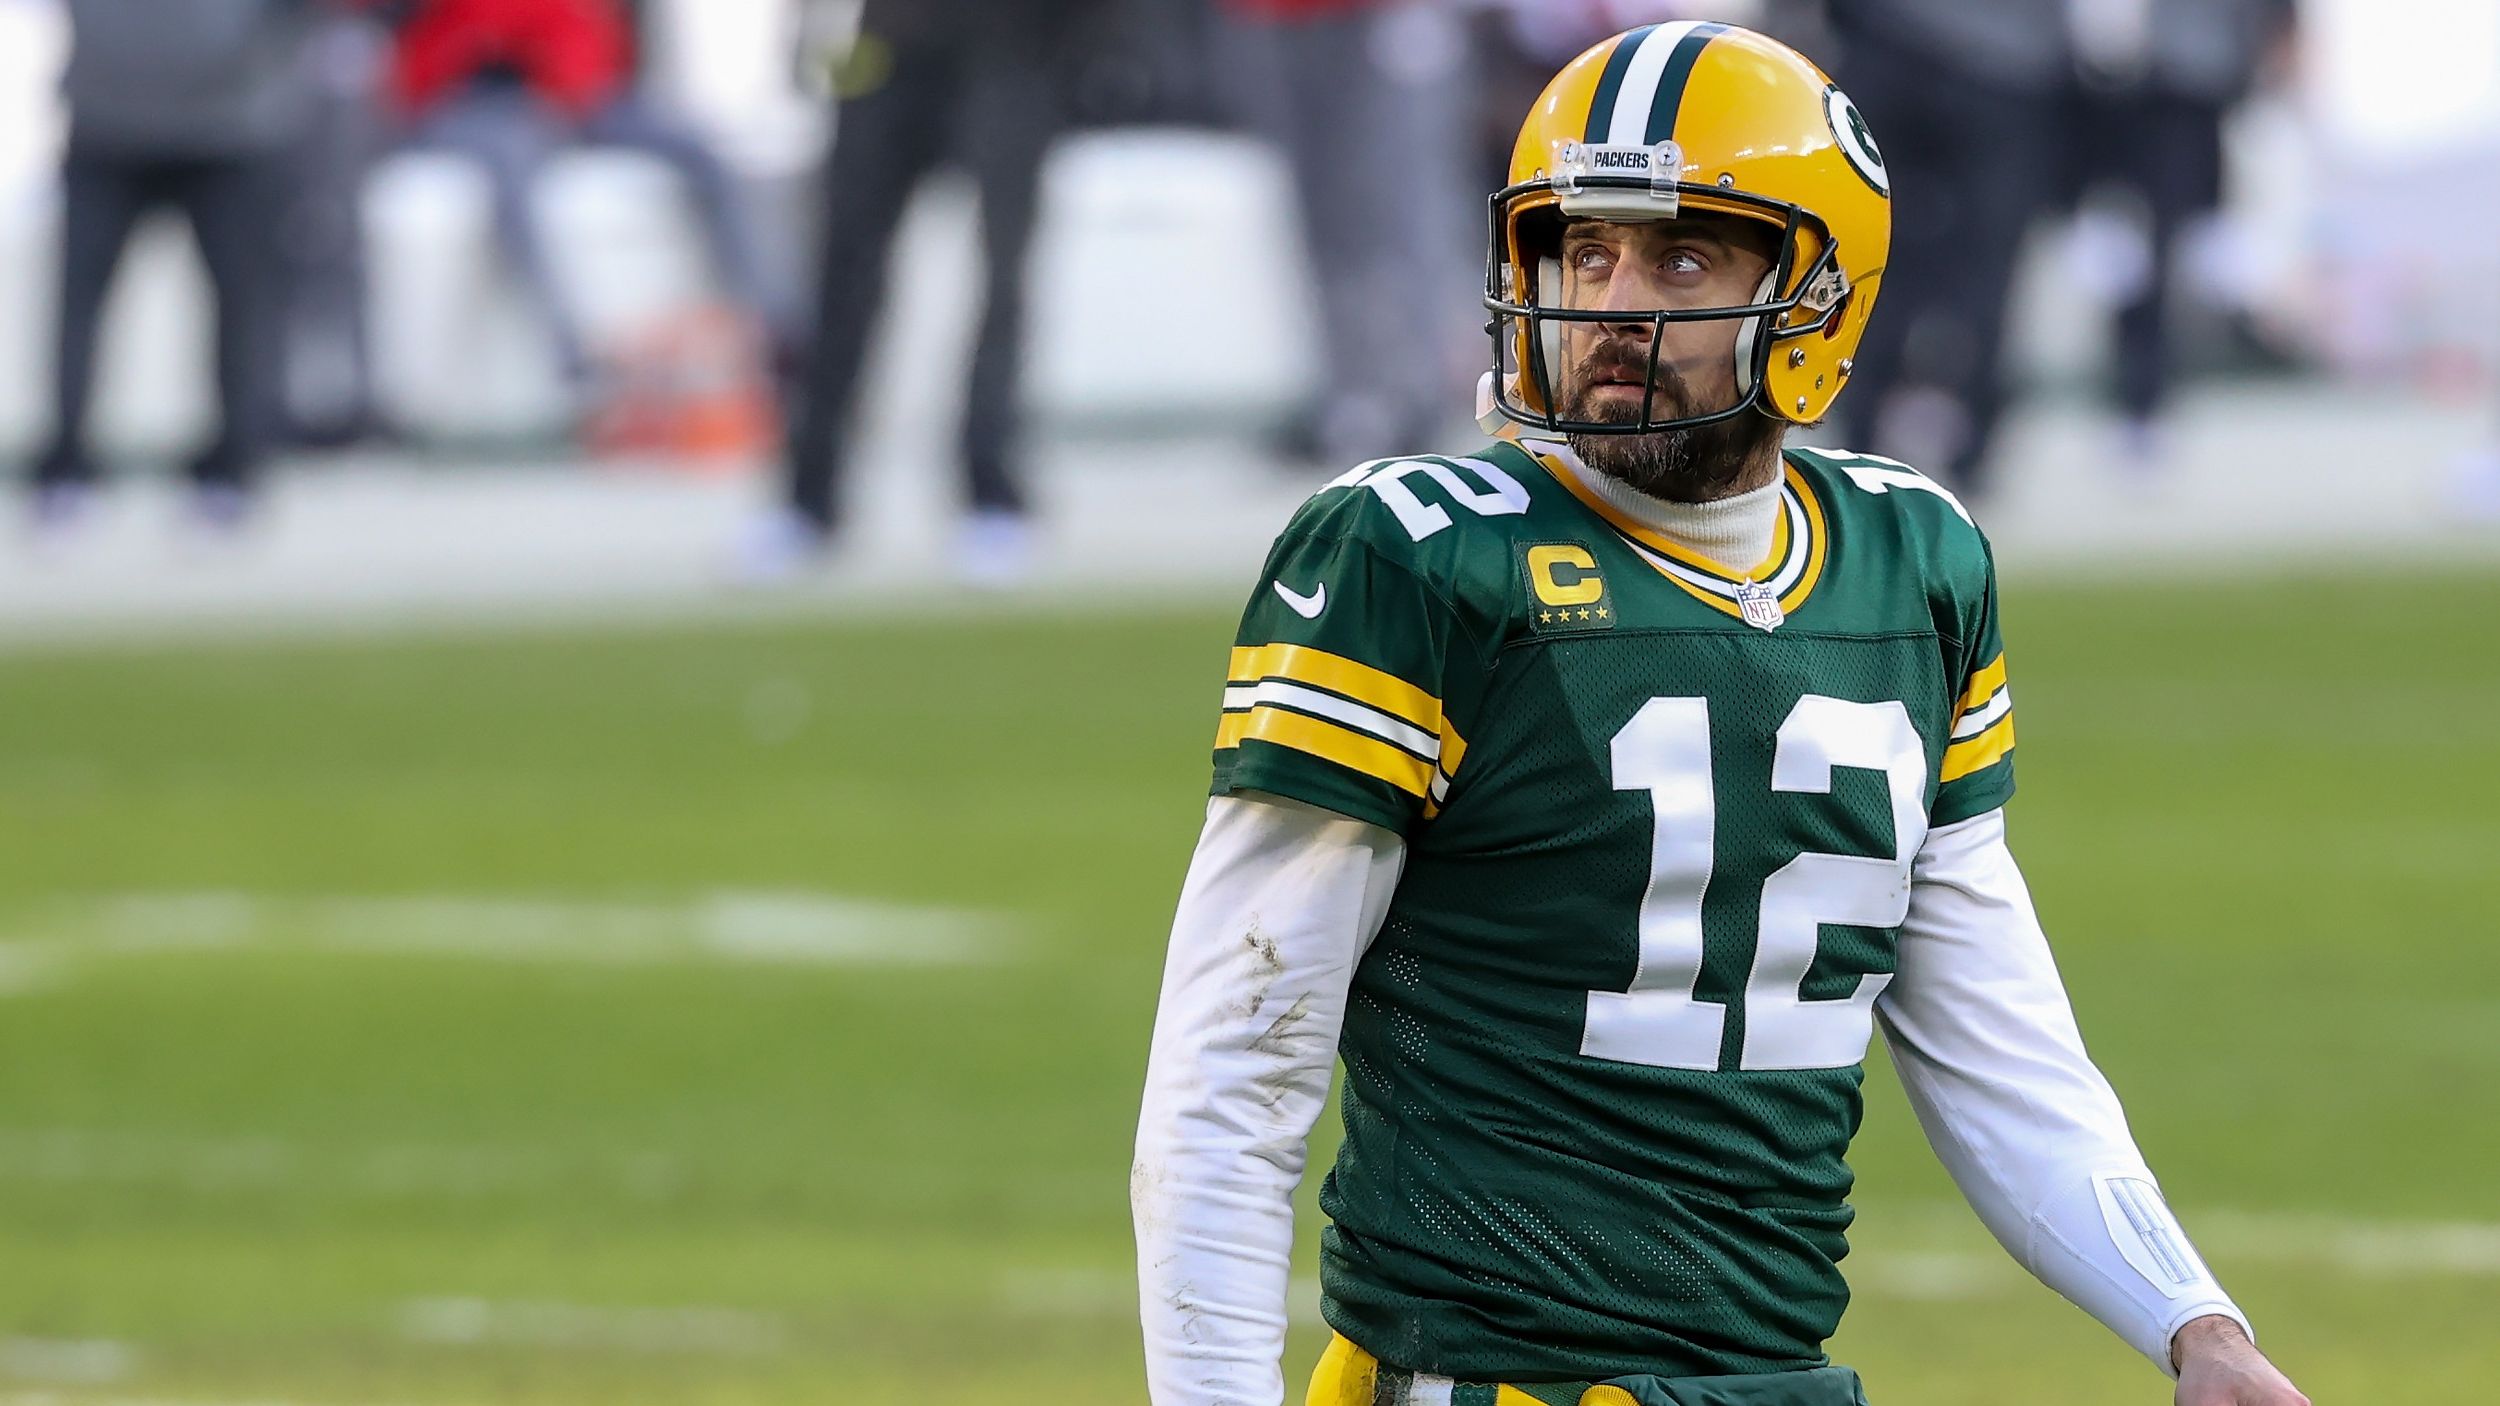 Aaron Rodgers' future with the Green Bay Packers is uncertain after NFL playoff defeat